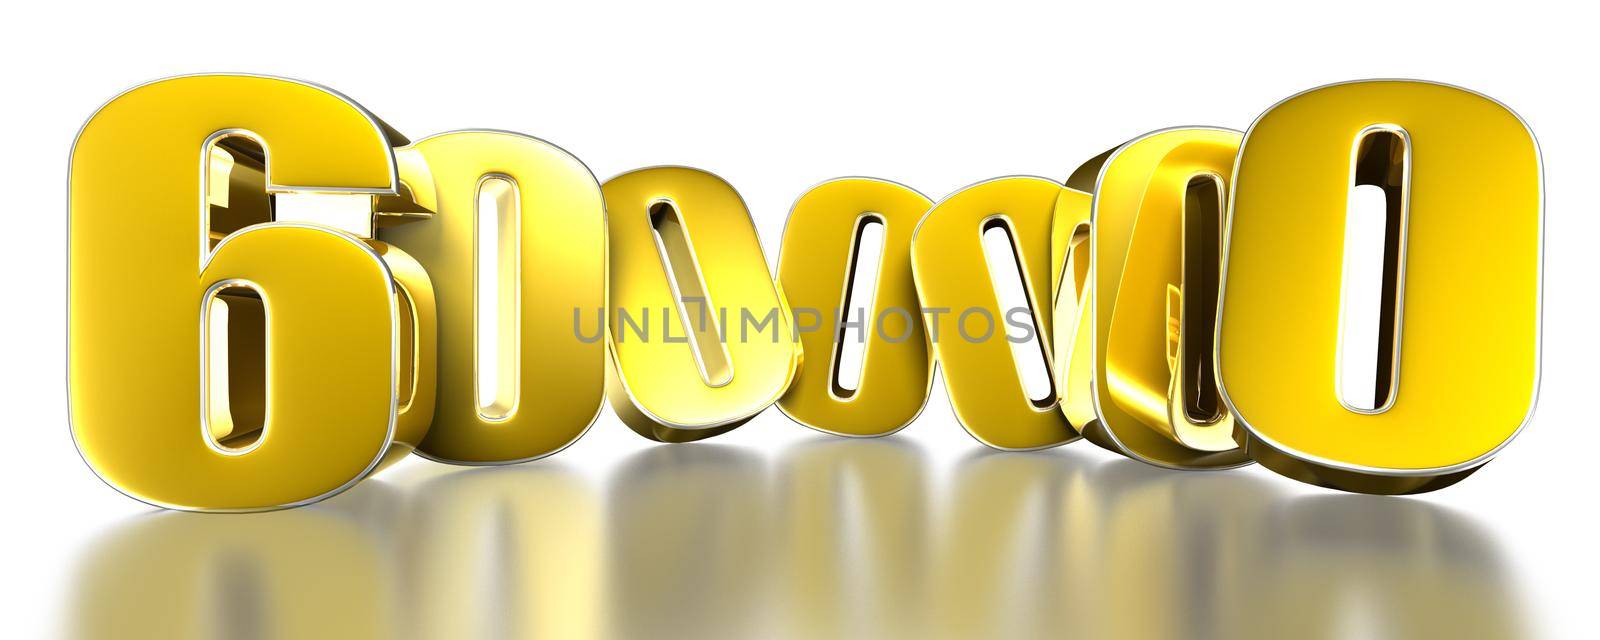 6 000 000 gold 3D illustration on white background with clipping path. by thitimontoyai